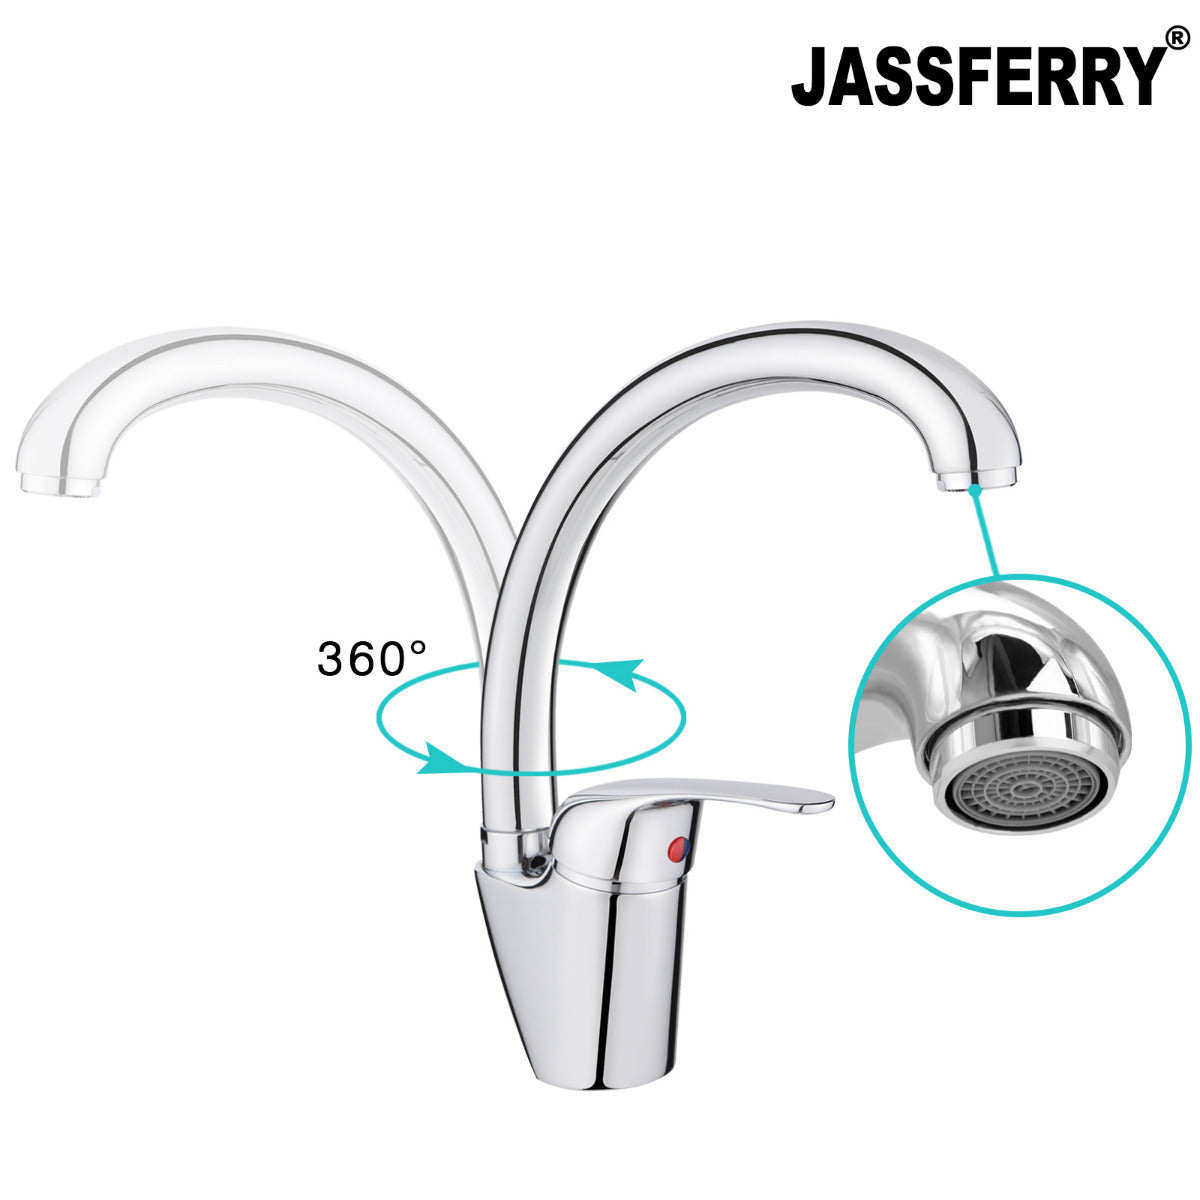 JassferryJASSFERRY Traditional Kitchen Sink Mixer Taps Waterfall Single Lever Hot and ColdKitchen Sinks